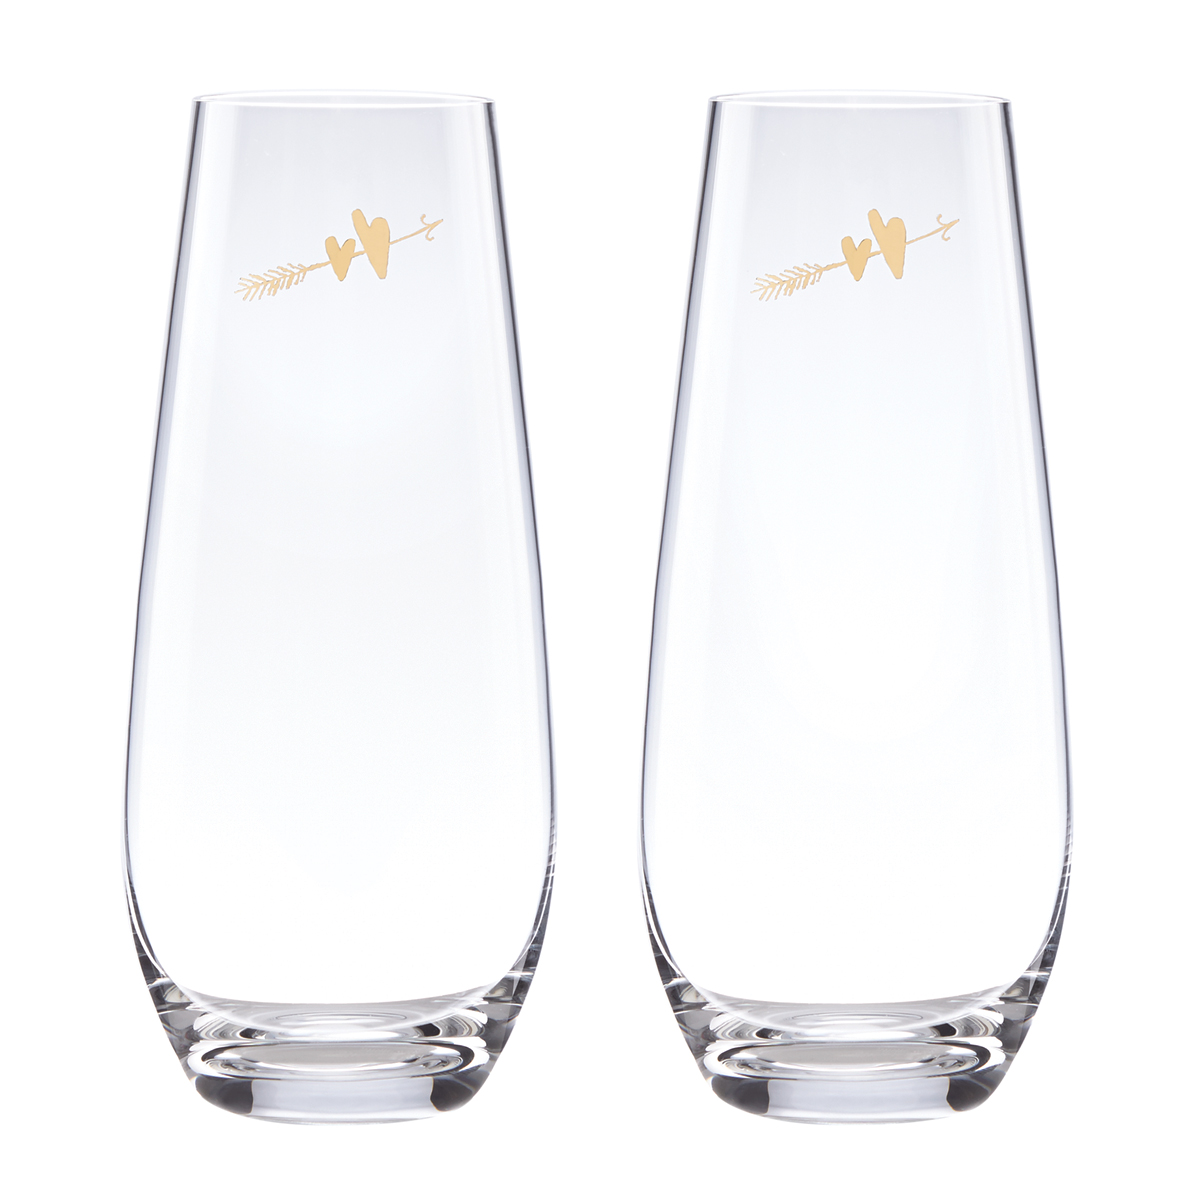 Kate Spade New York, Lenox Two Hearts Stemless Champagne Flute Pair